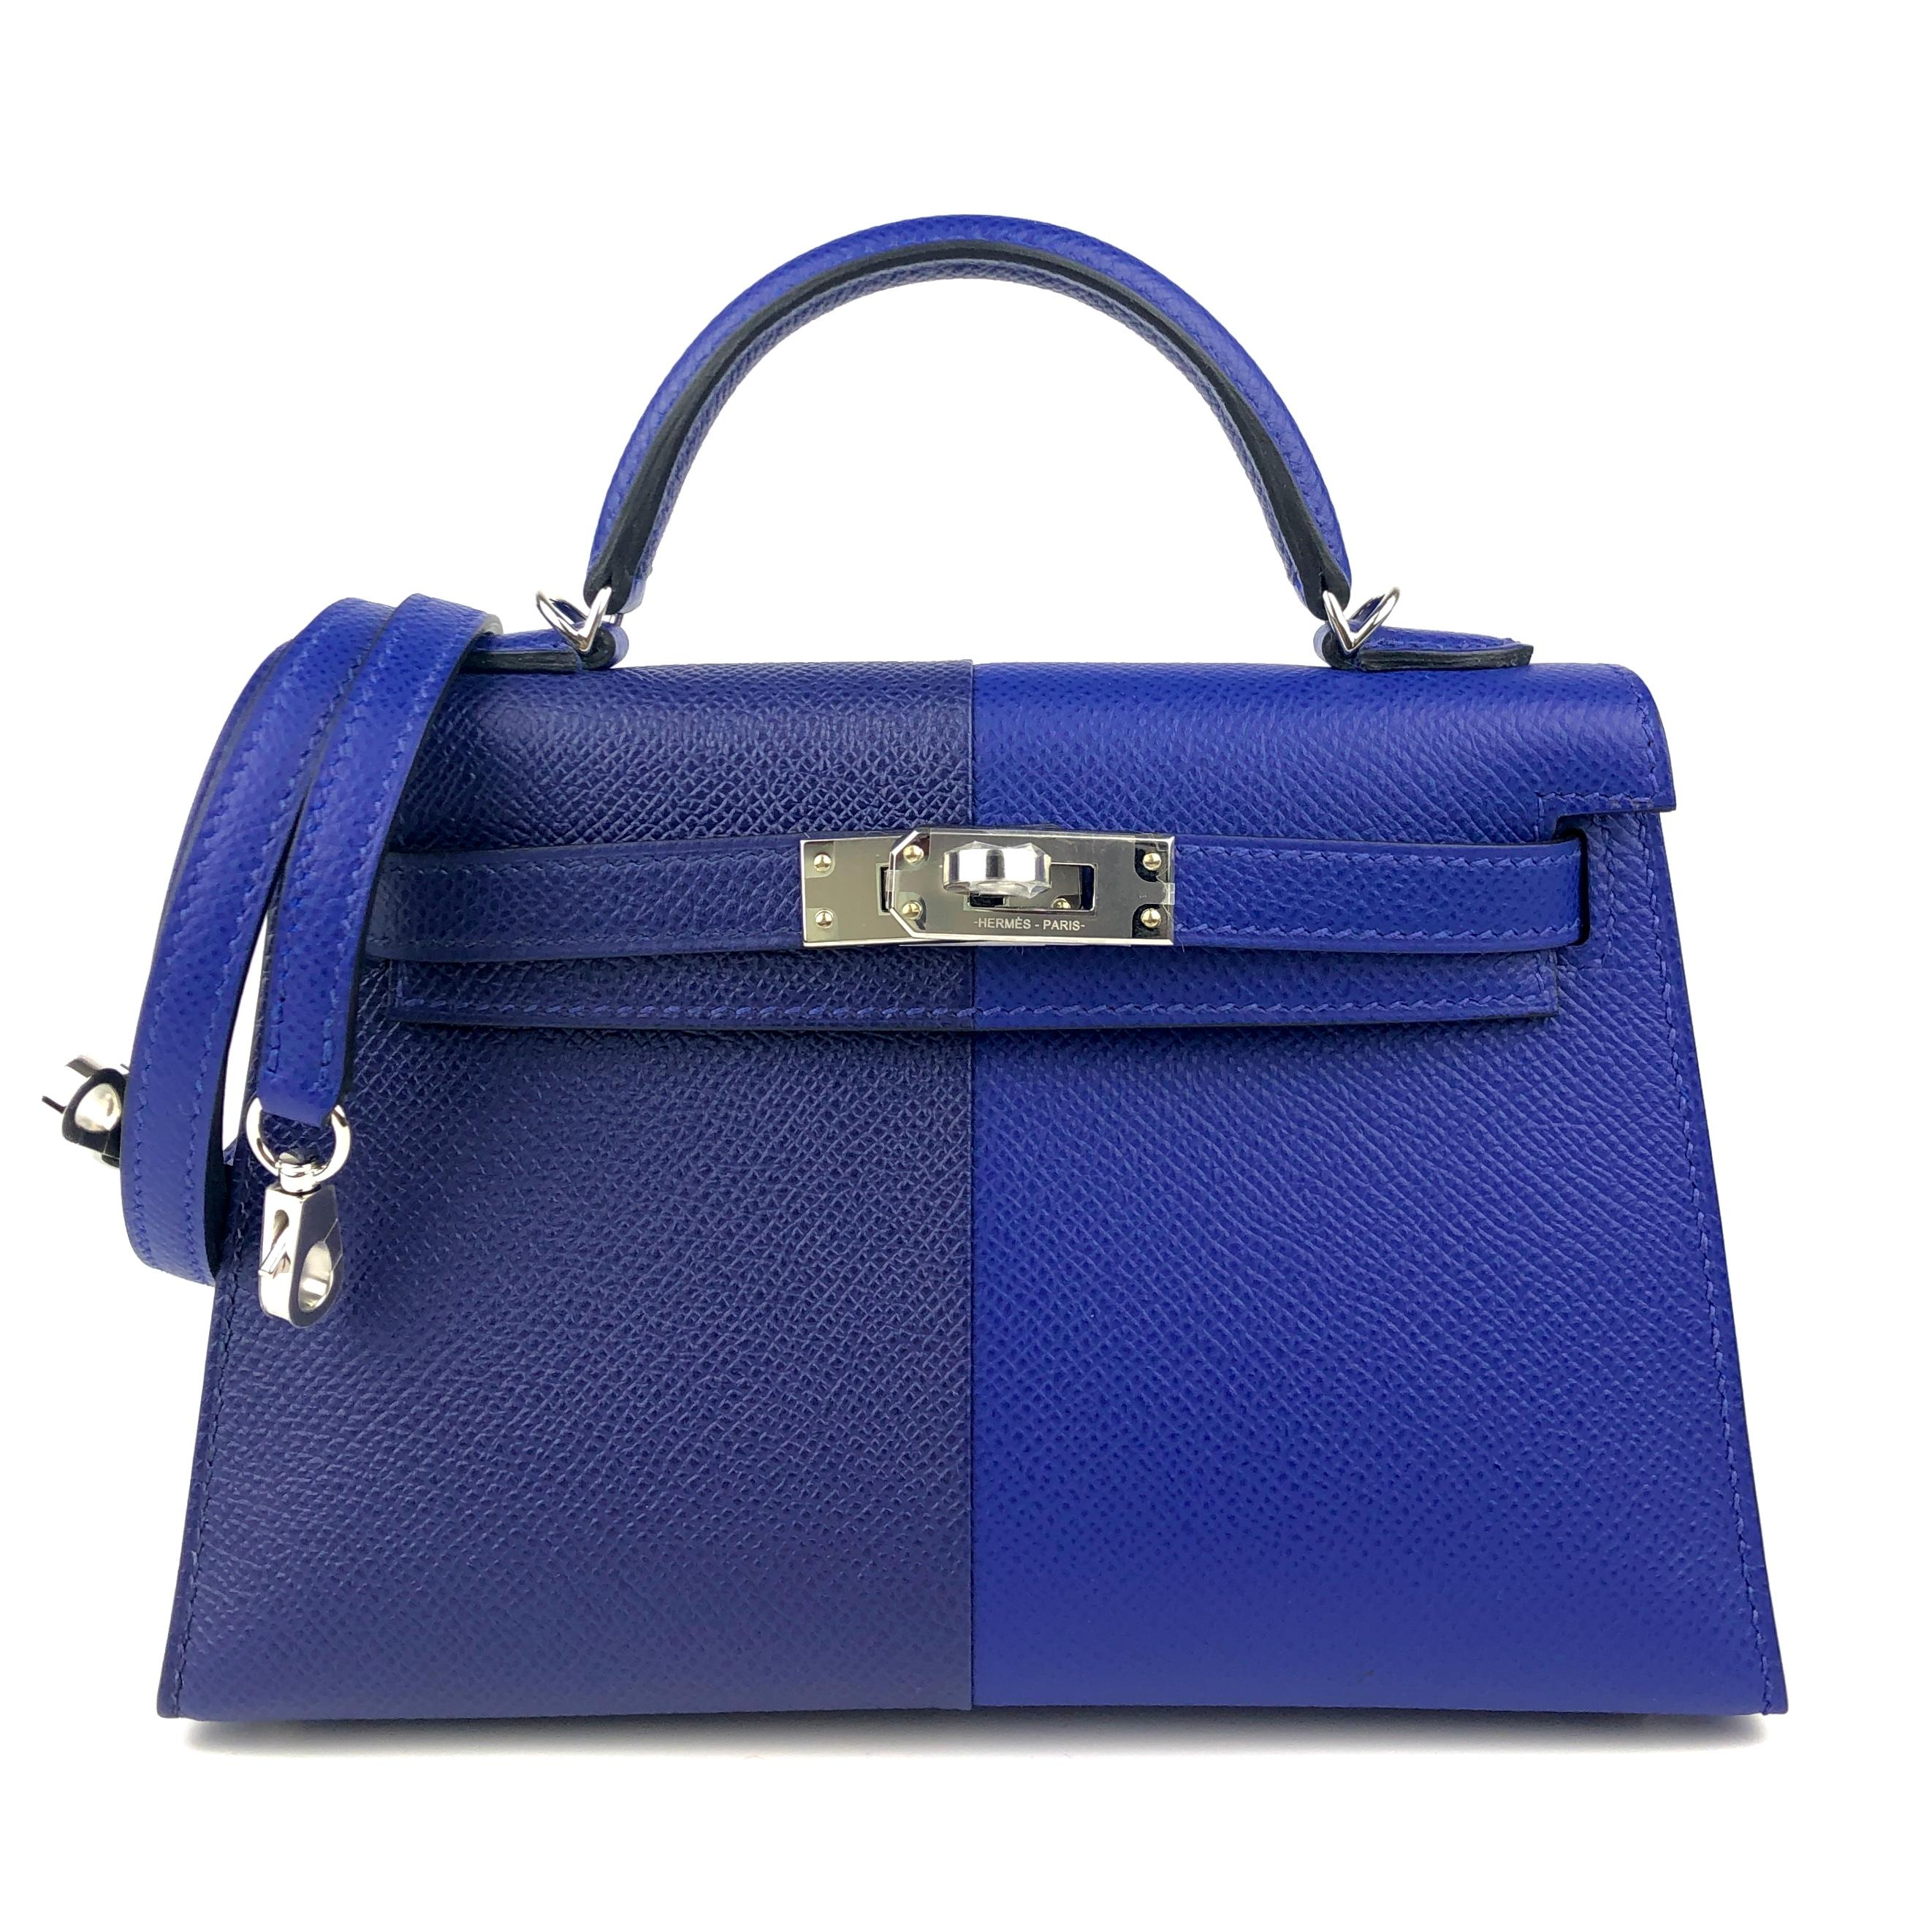 Only One For Sale in the World! ULTRA RARE Tri Color Hermes Kelly 20 Mini Blue Electric, Blue Encre and Gold Interior Epsom Leather Complimented by Palladium Hardware. Z Stamp Full Set. 

Shop with Confidence from Lux Addicts. Authenticity